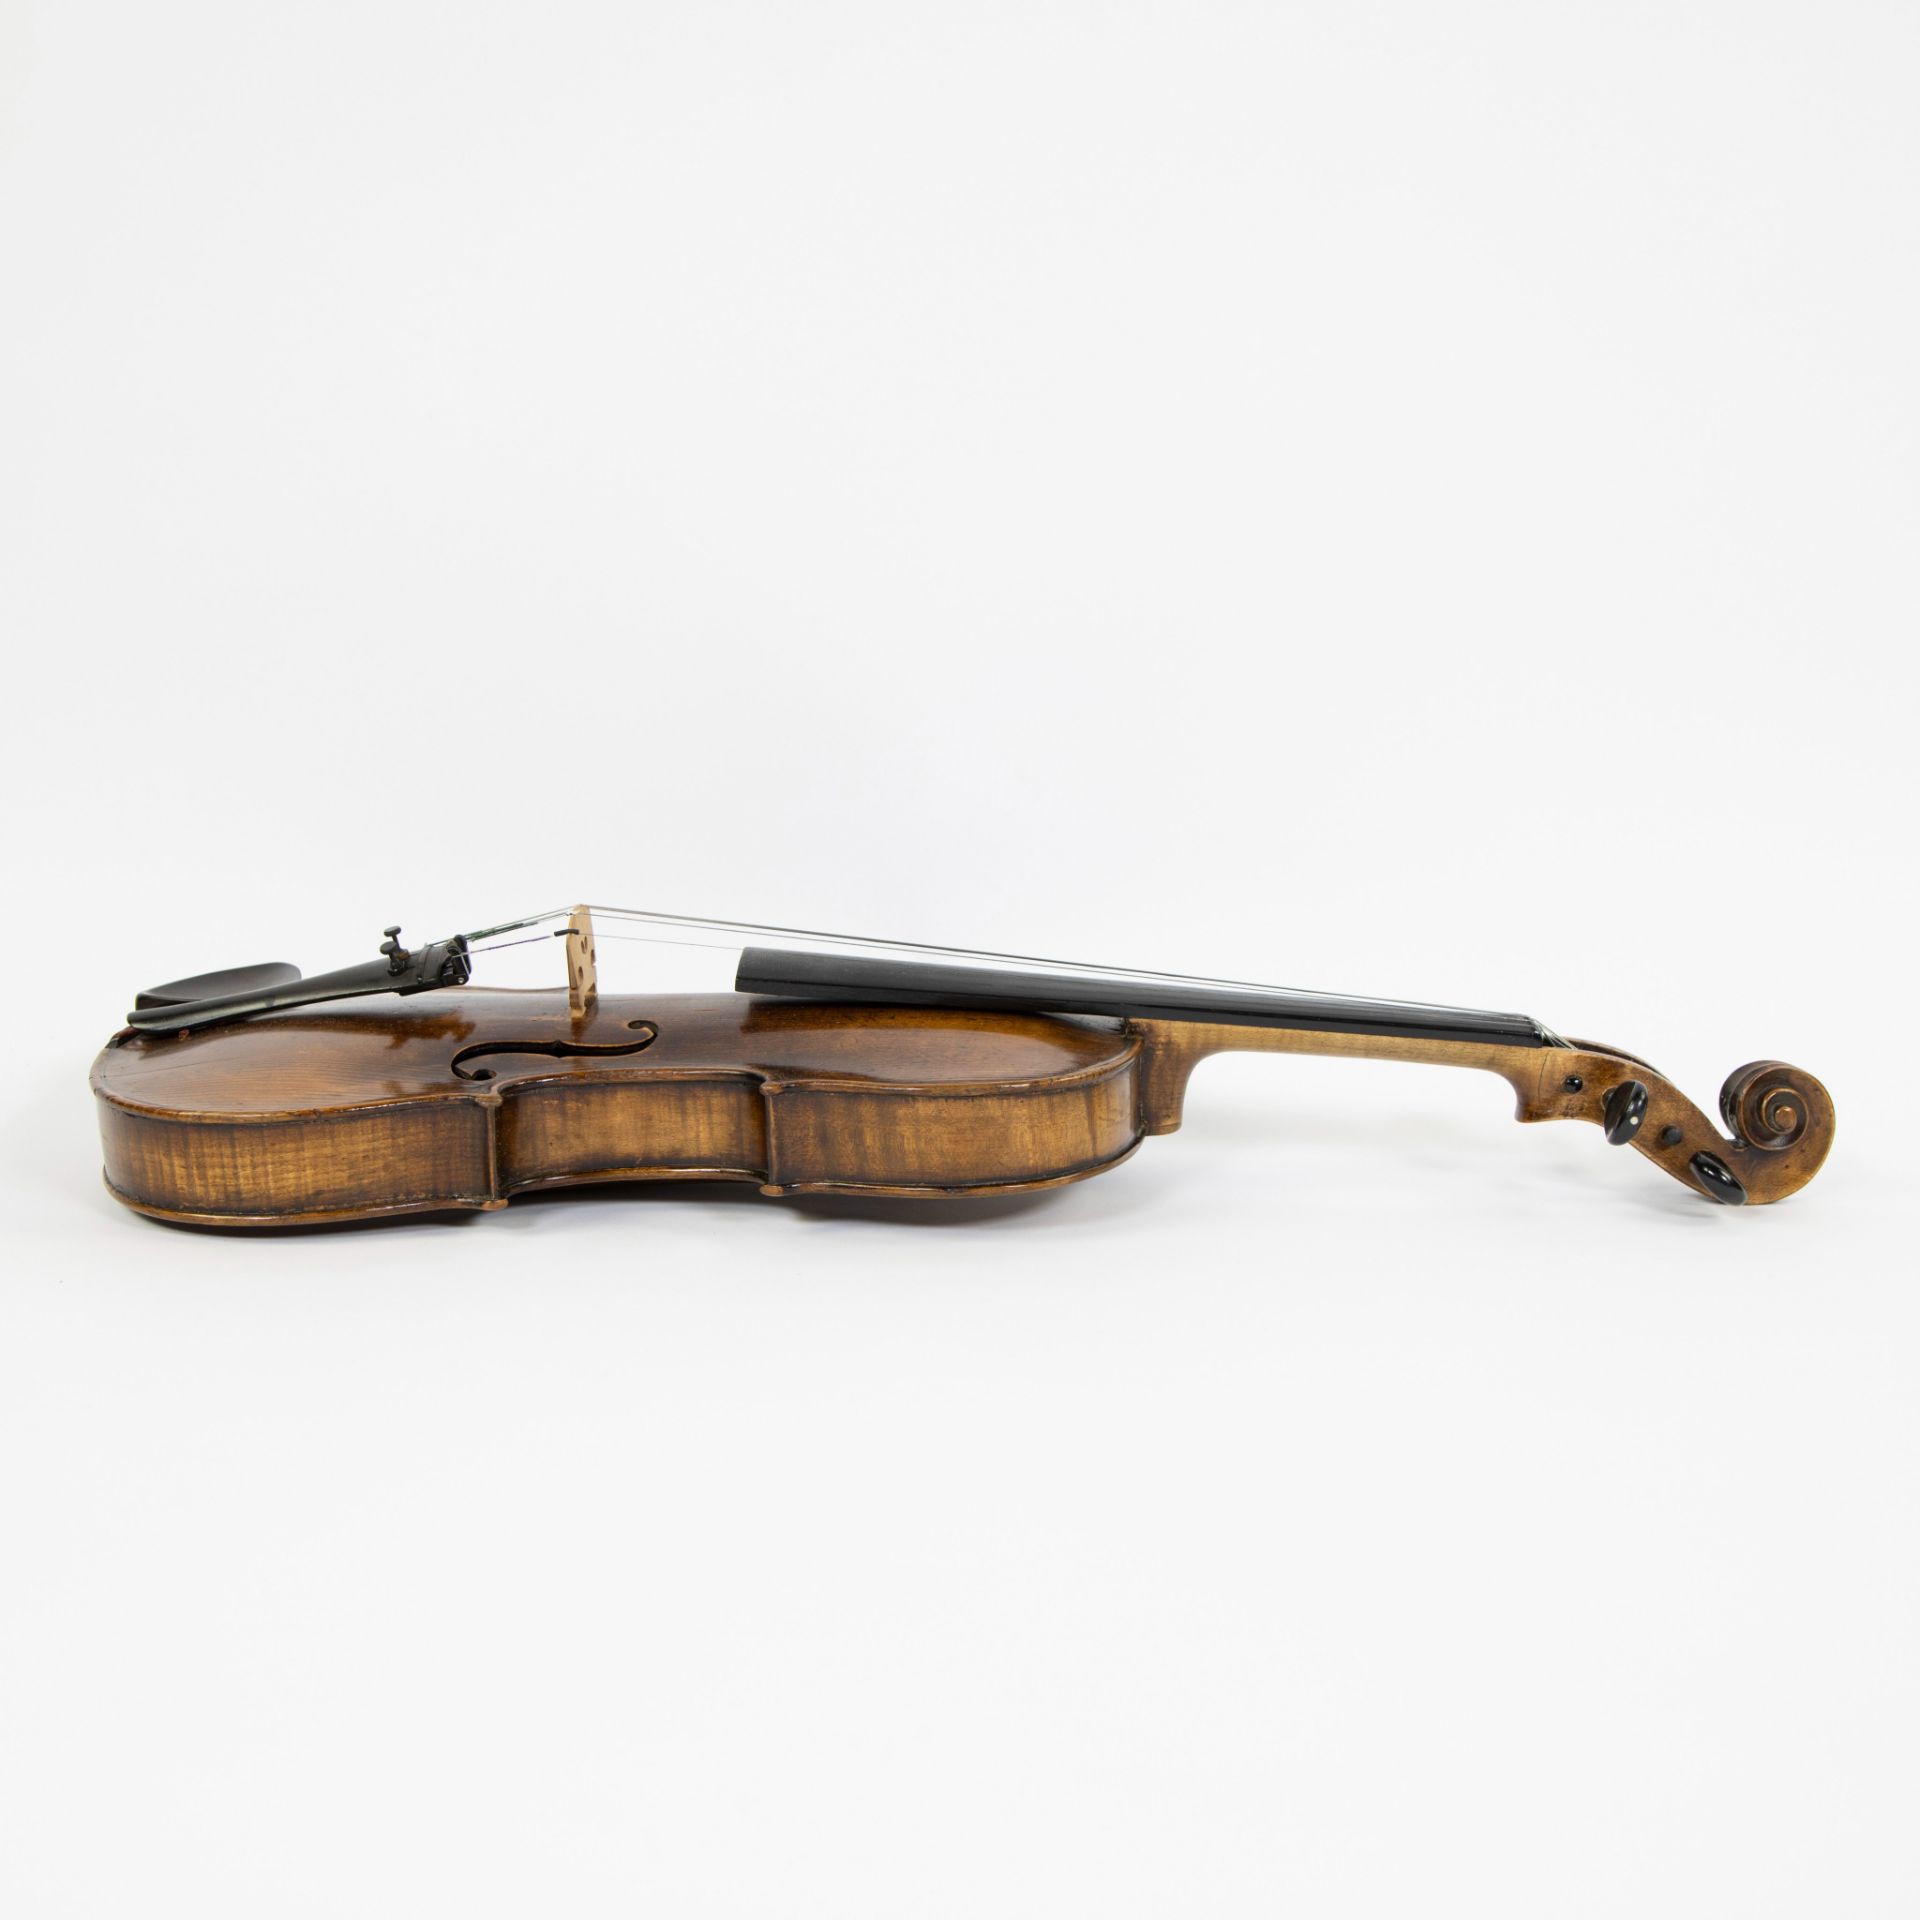 Violin Label 'Jocubus Stainer in Absam Prope Oenipontem', 363mm, case incl., 358mm, wooden case - Image 4 of 5